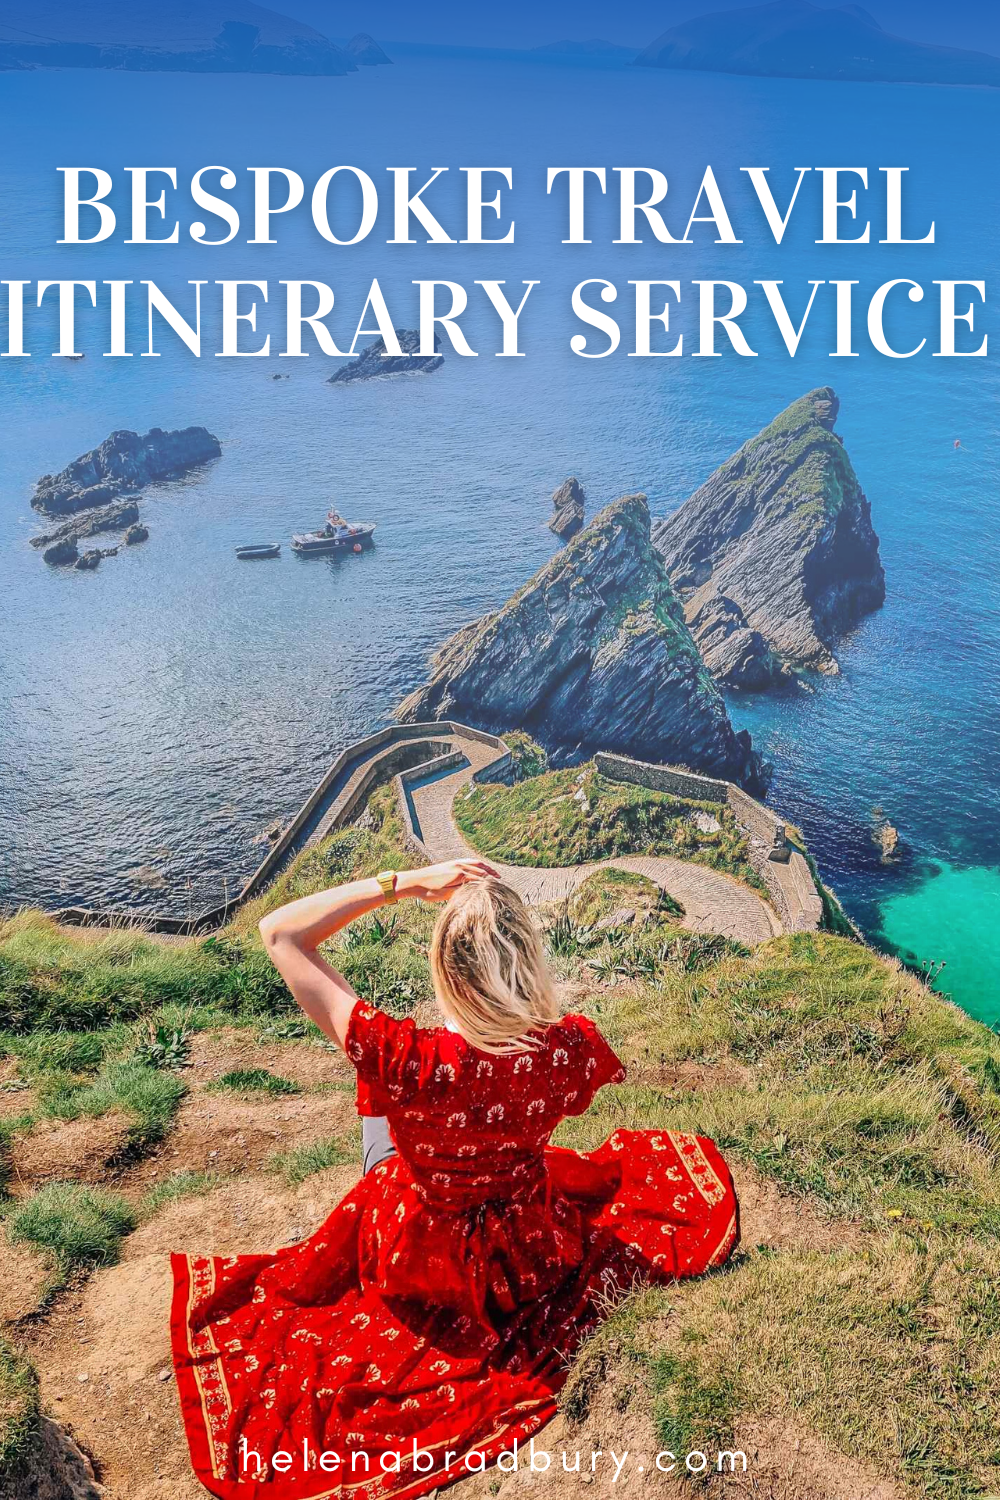 Let me build your bespoke travel itinerary with my custom travel itinerary service - I do the hard work, you keep full control. | bespoke travel itinerary service | bespoke travel planner | travel planner site | travel planner sample | bespoke travel